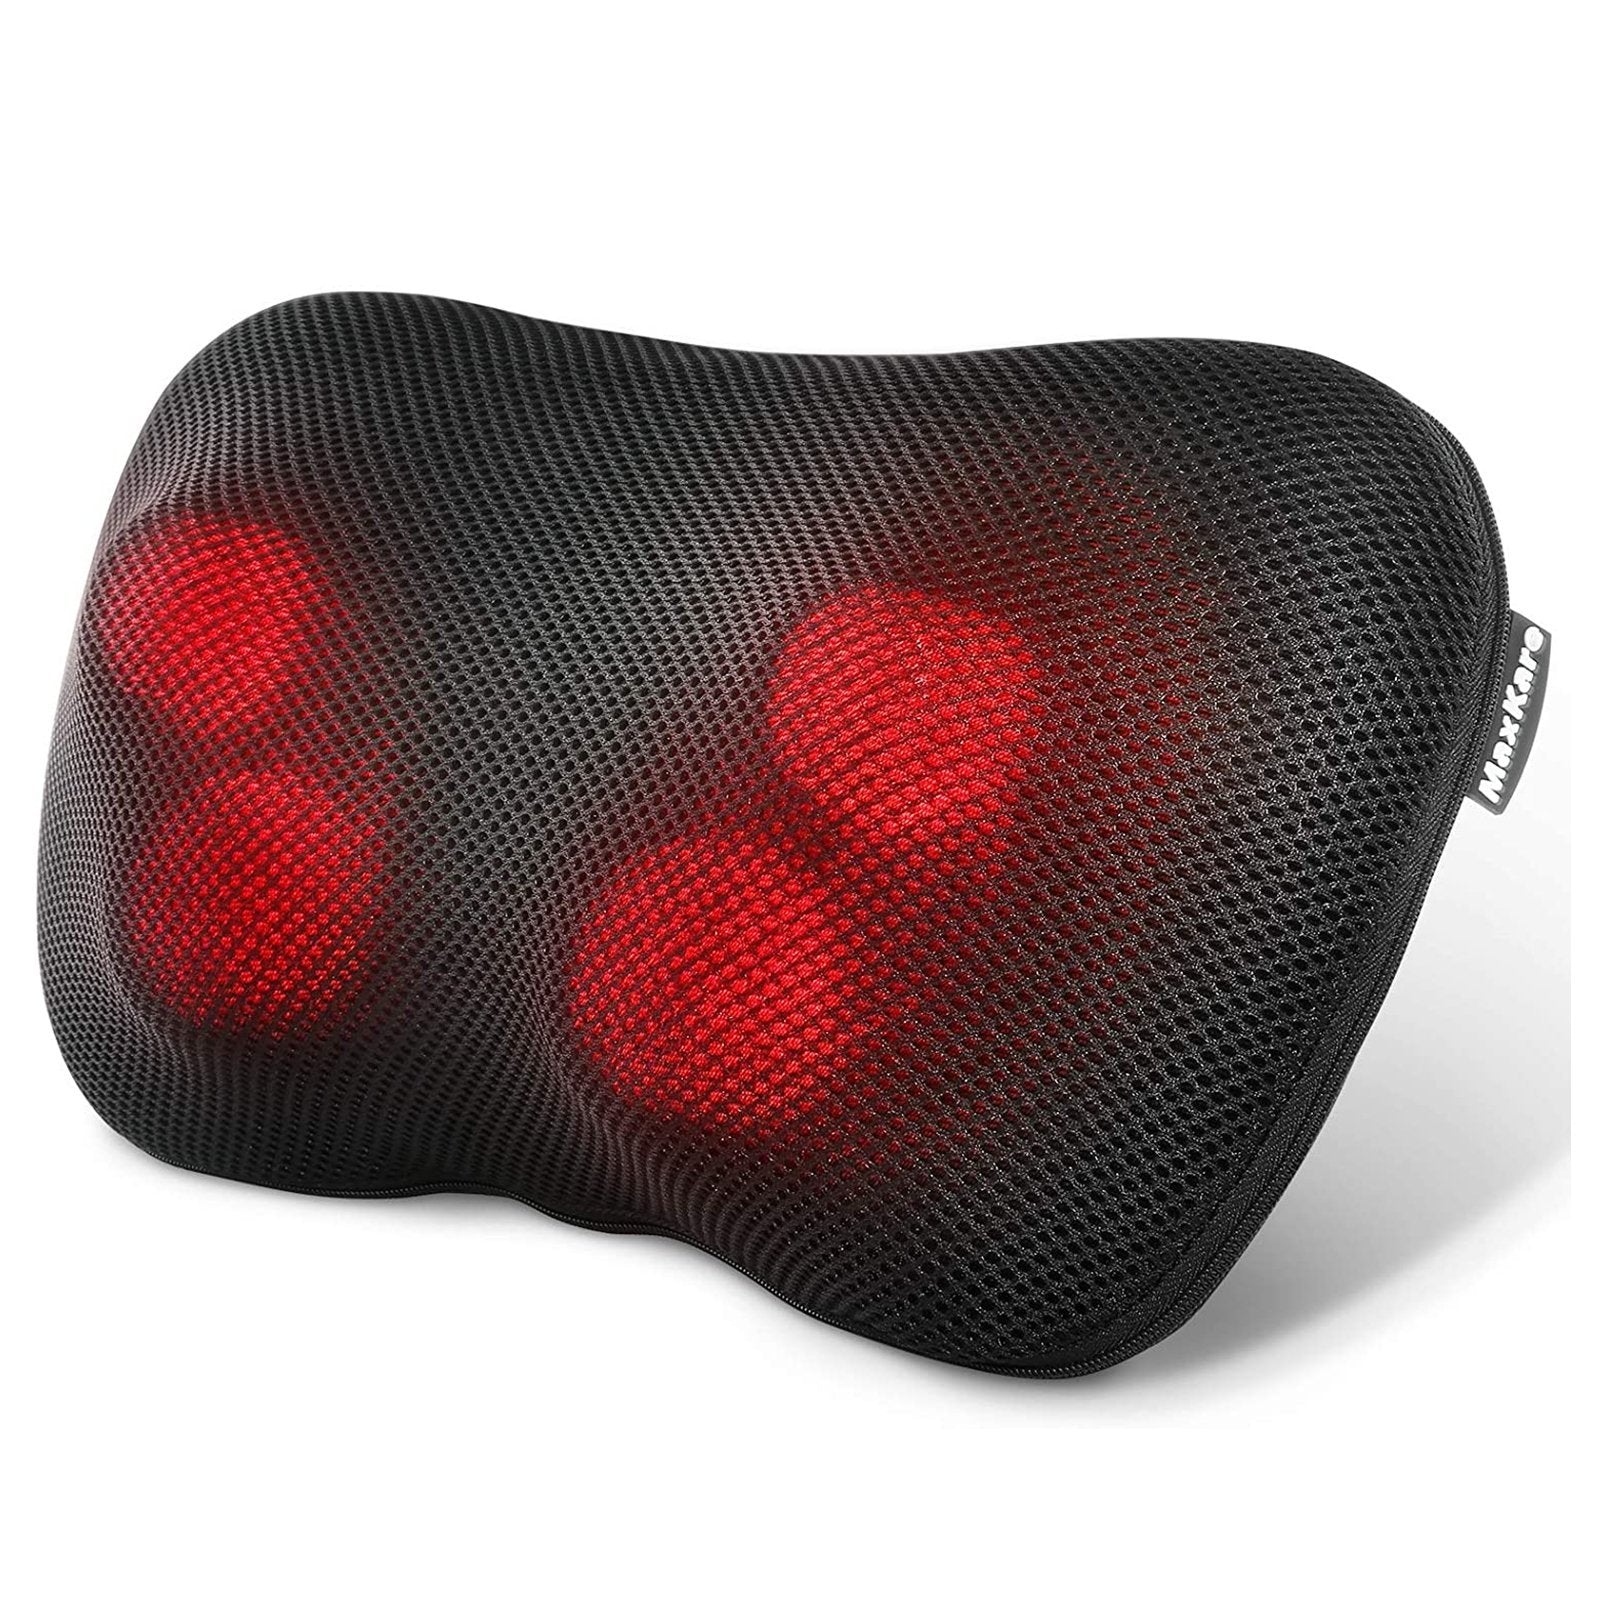 Real Relax® MP-02 Back Massager with Heat for Back Pain Relief Shiatsu  Kneading Massage Pillow Ideal Gifts for Men Women